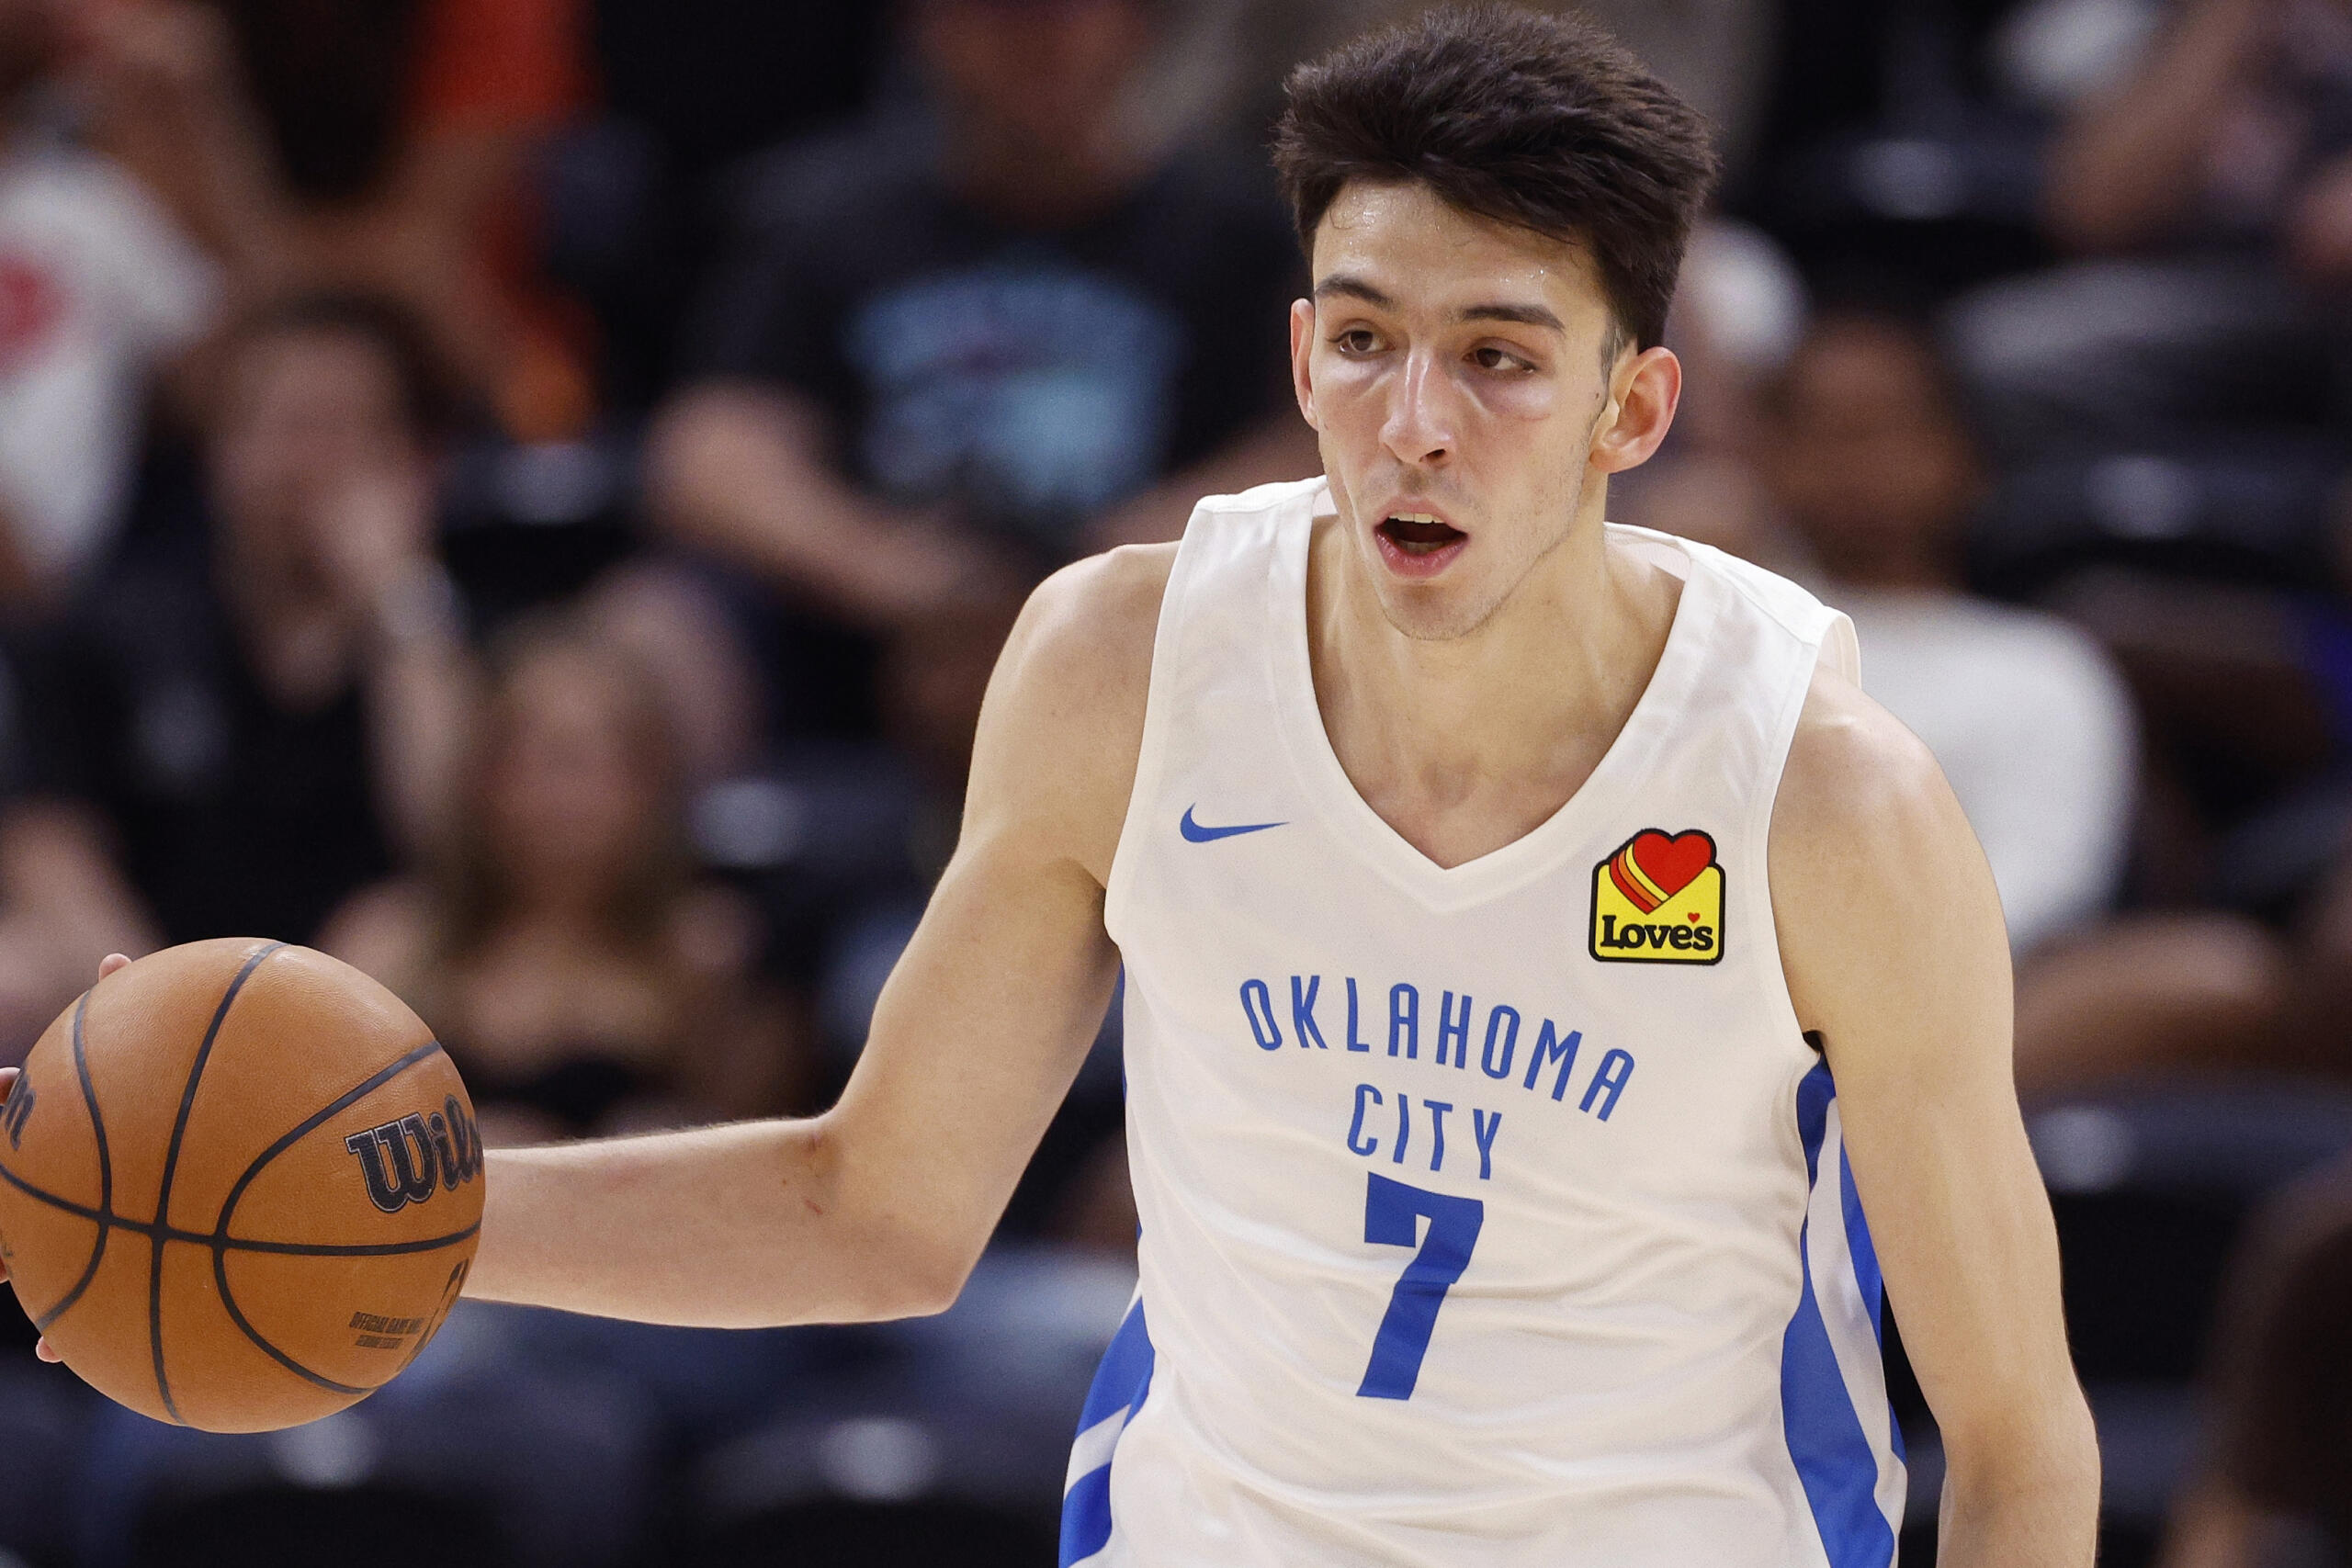 Oklahoma City Thunder forward Chet Holmgren, the No. 2 pick in the NBA draft out of Gonzaga, will miss the 2022-23 season because of a right foot injury, the Oklahoma City Thunder announced Thursday, Aug. 25, 2022.